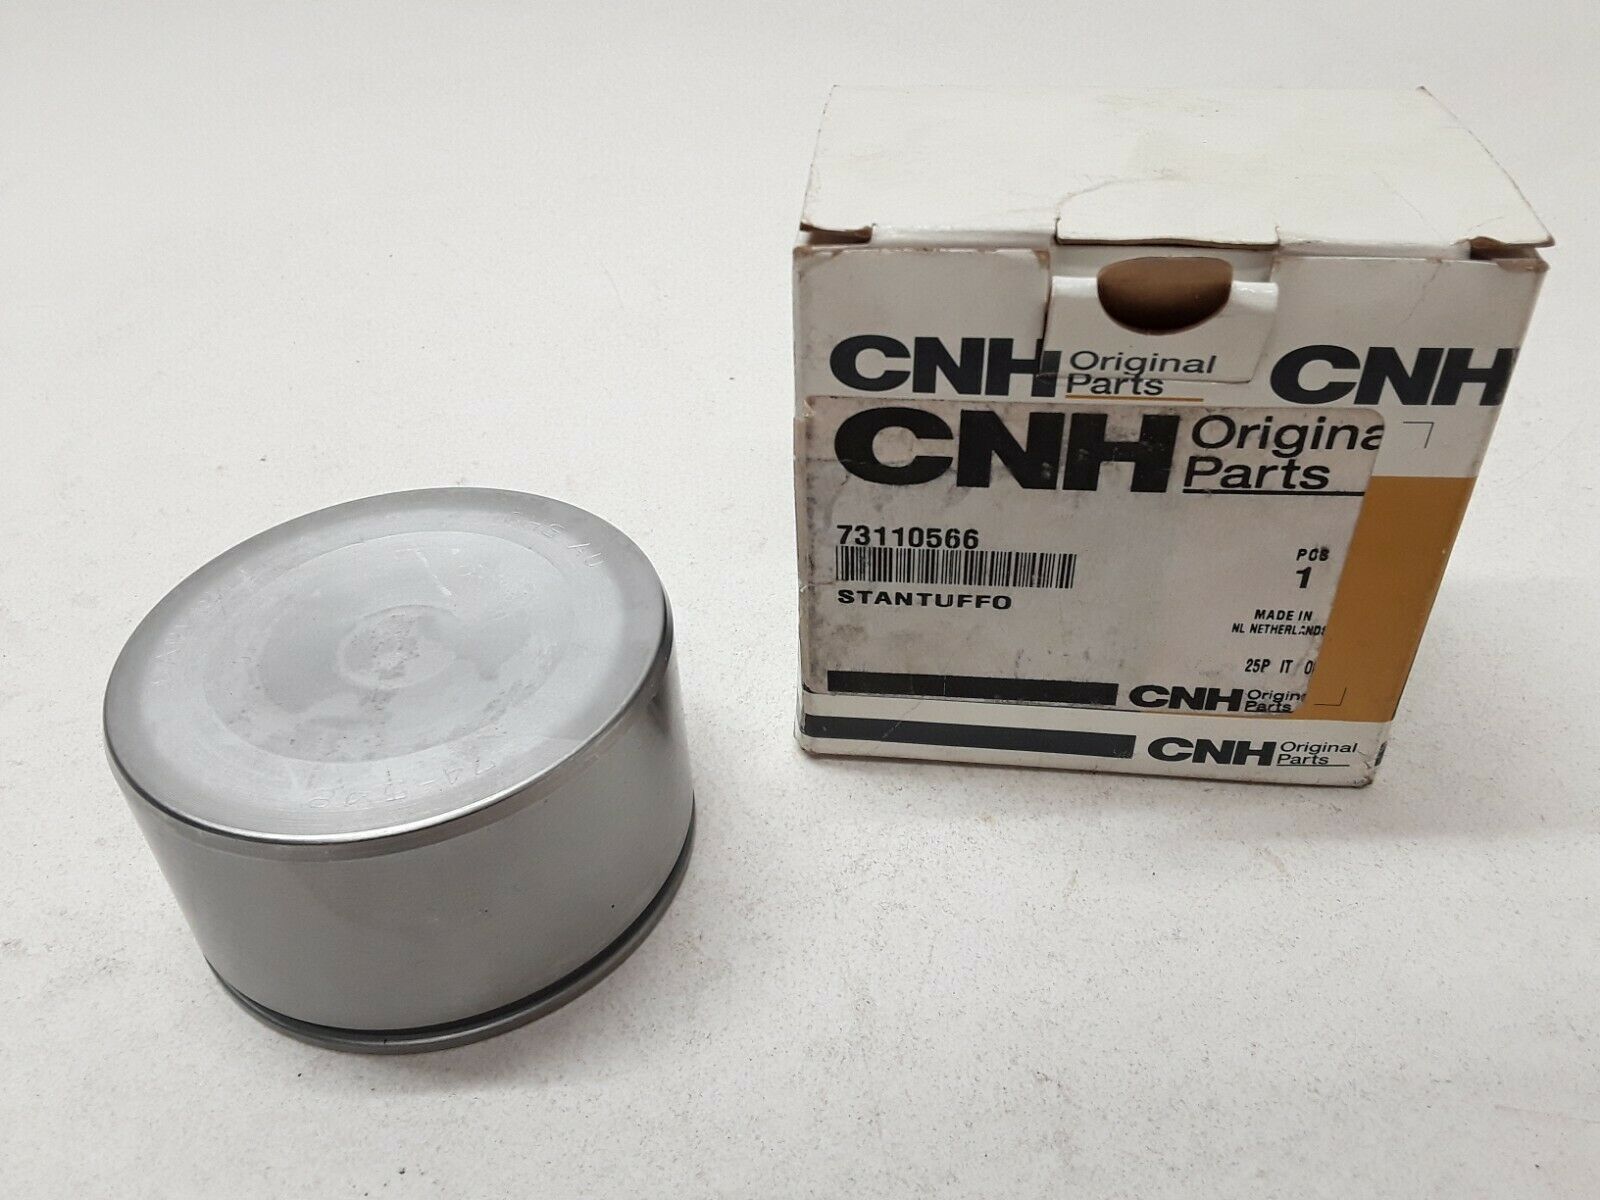 Carlisle 74-548 Piston Oem Cnh For Case 73110566 Fast Free Shipping